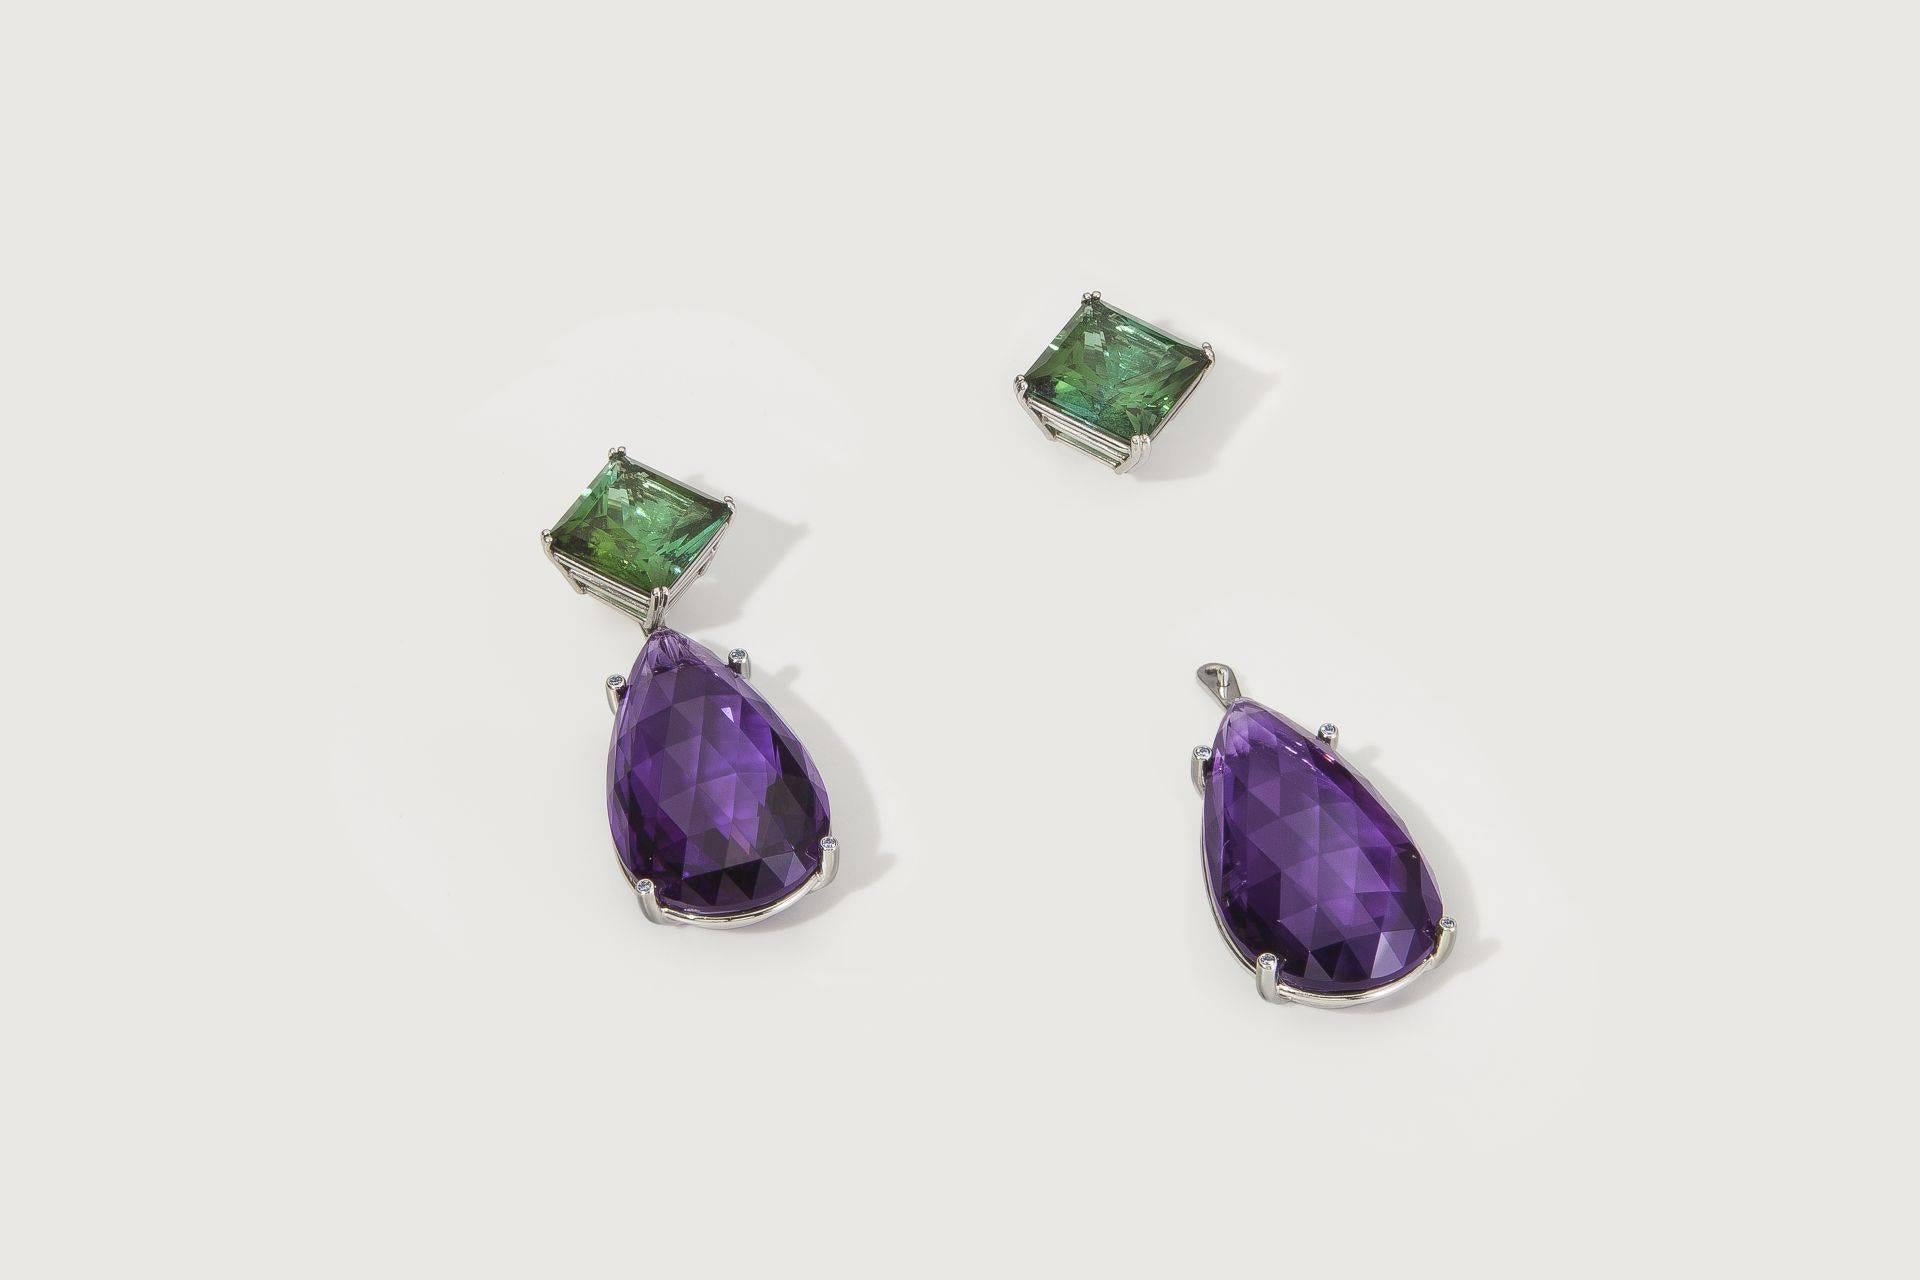 Elegance combined with superb craftmanship. Rich colors, beautifully cut stones, 
Two in One: Earrings, tourmaline 30,46 ct. with detachable amethyst drops 51,86 ct., platinum and diamonds 0,04 ct.
Gorgeous Earrings for stunning ladies. Simplicity